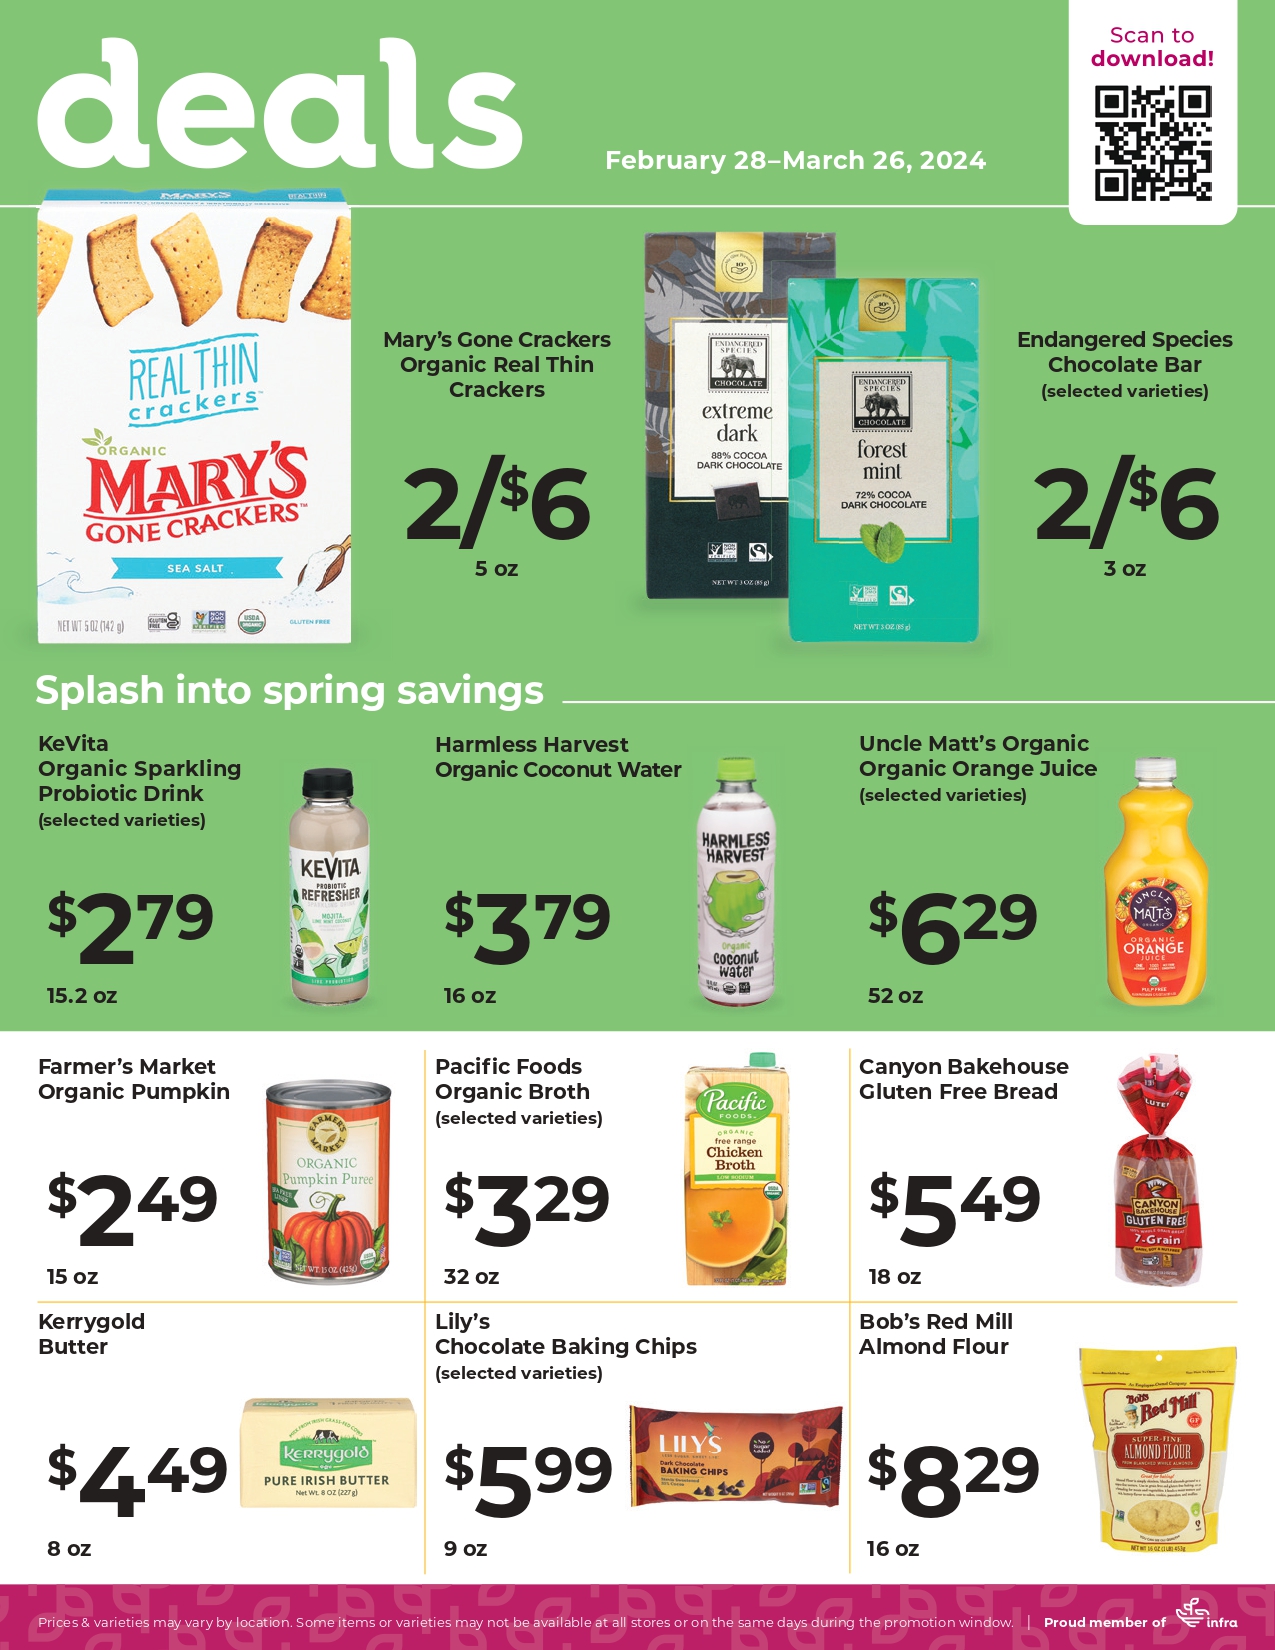 Ramona Family Naturals - monthly specials page 1